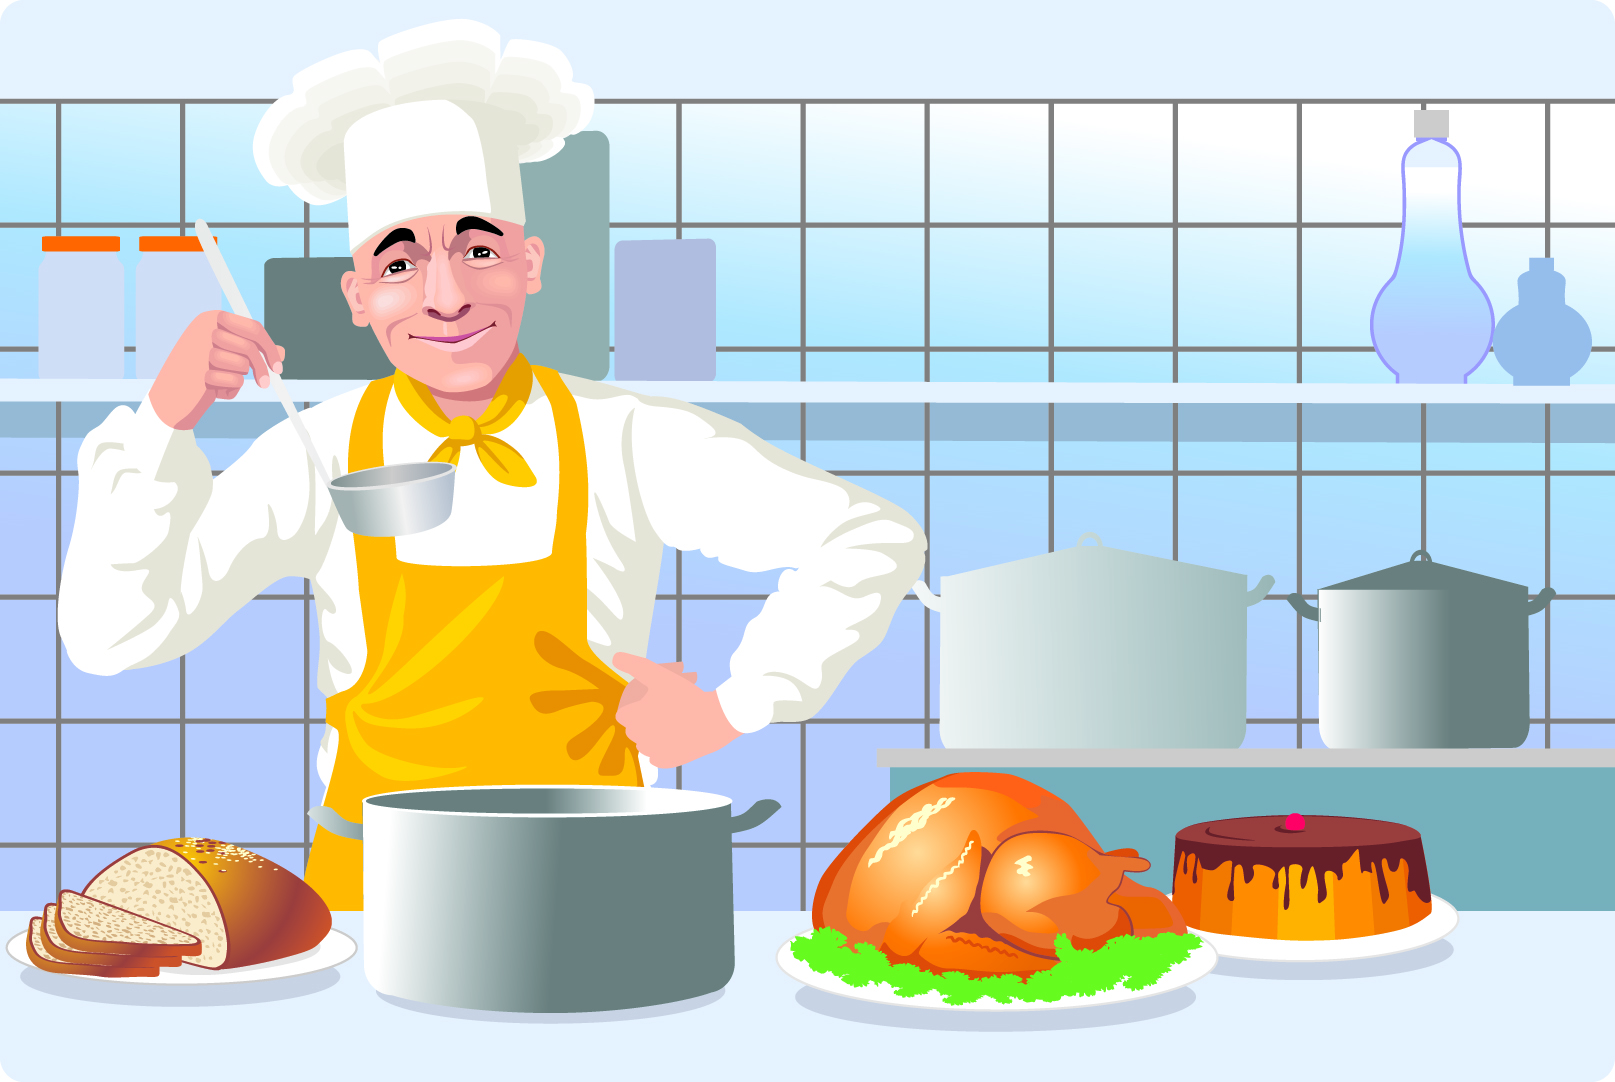 Man Cooking Clipart Displaying 19 Images For Man Cooking Clipart